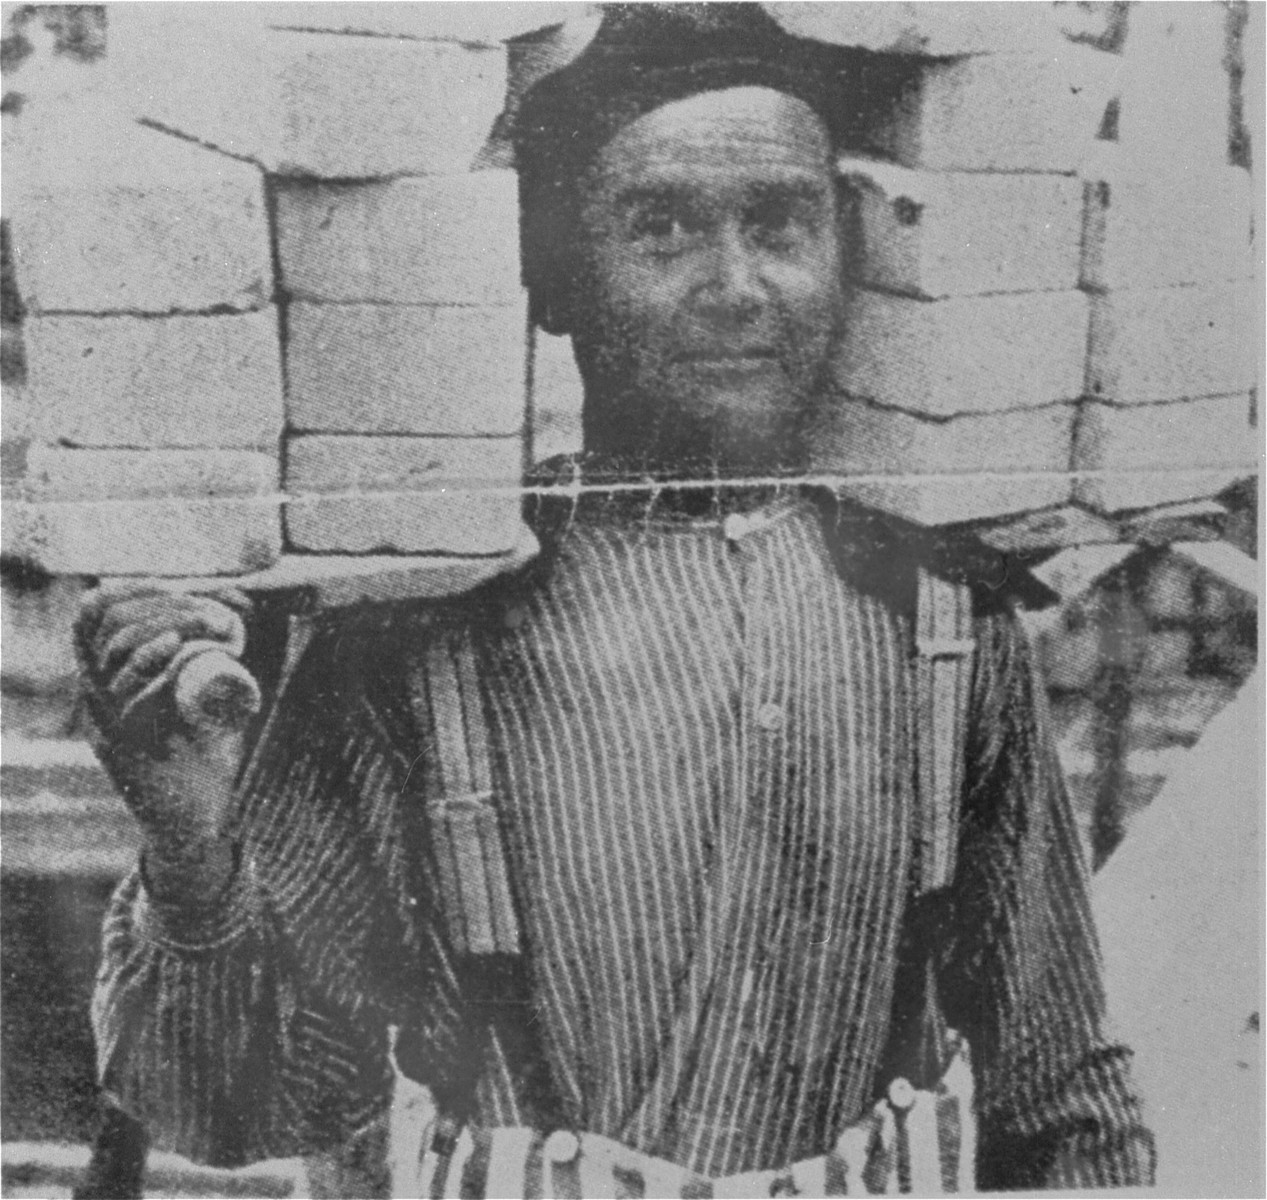 Propaganda photo of a prisoner in Dachau at forced labor.  

The caption which originally appeared with this Nazi propaganda photograph read: "A load of bricks is lighter then the burden of the crime - appreciation for achievement is taught".